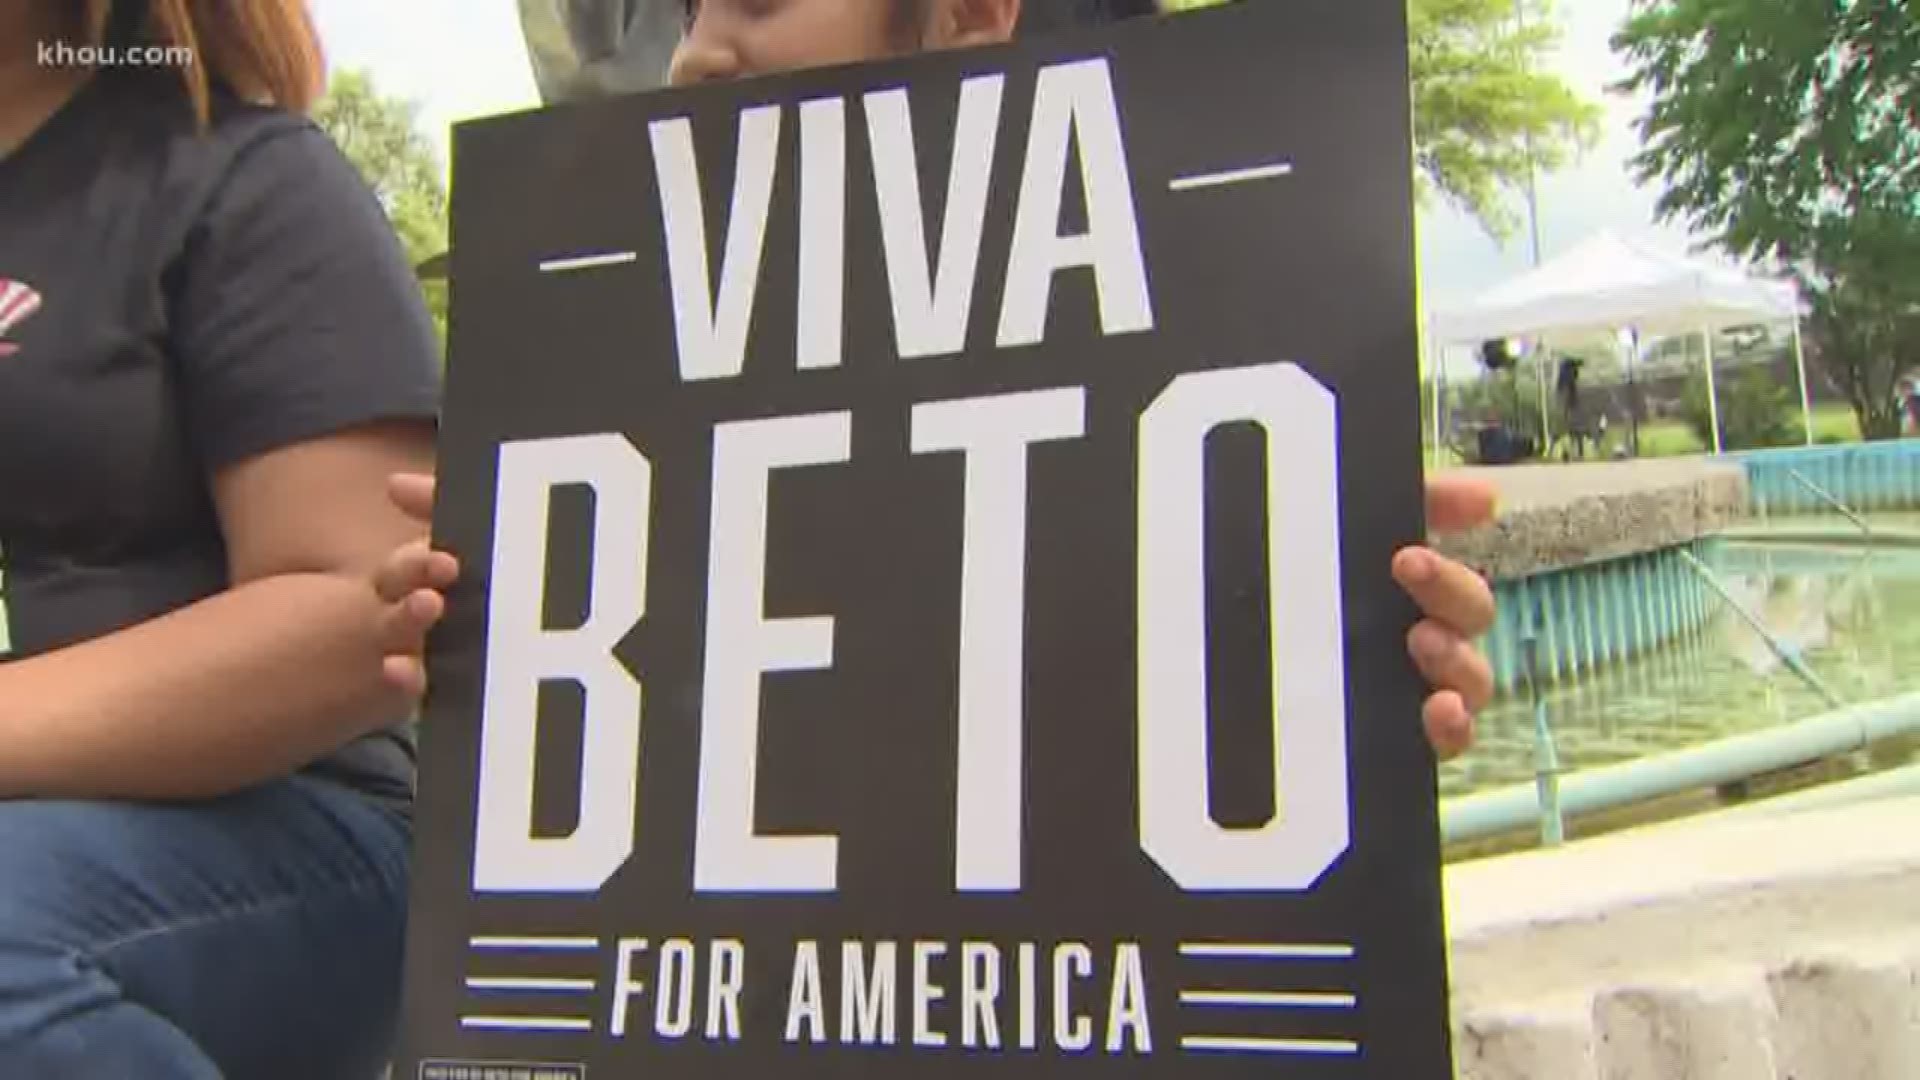 Presidential candidate Beto O'Rourke officially kicked off his campaign for President of the United States with a series of rallies across Texas on Saturday.